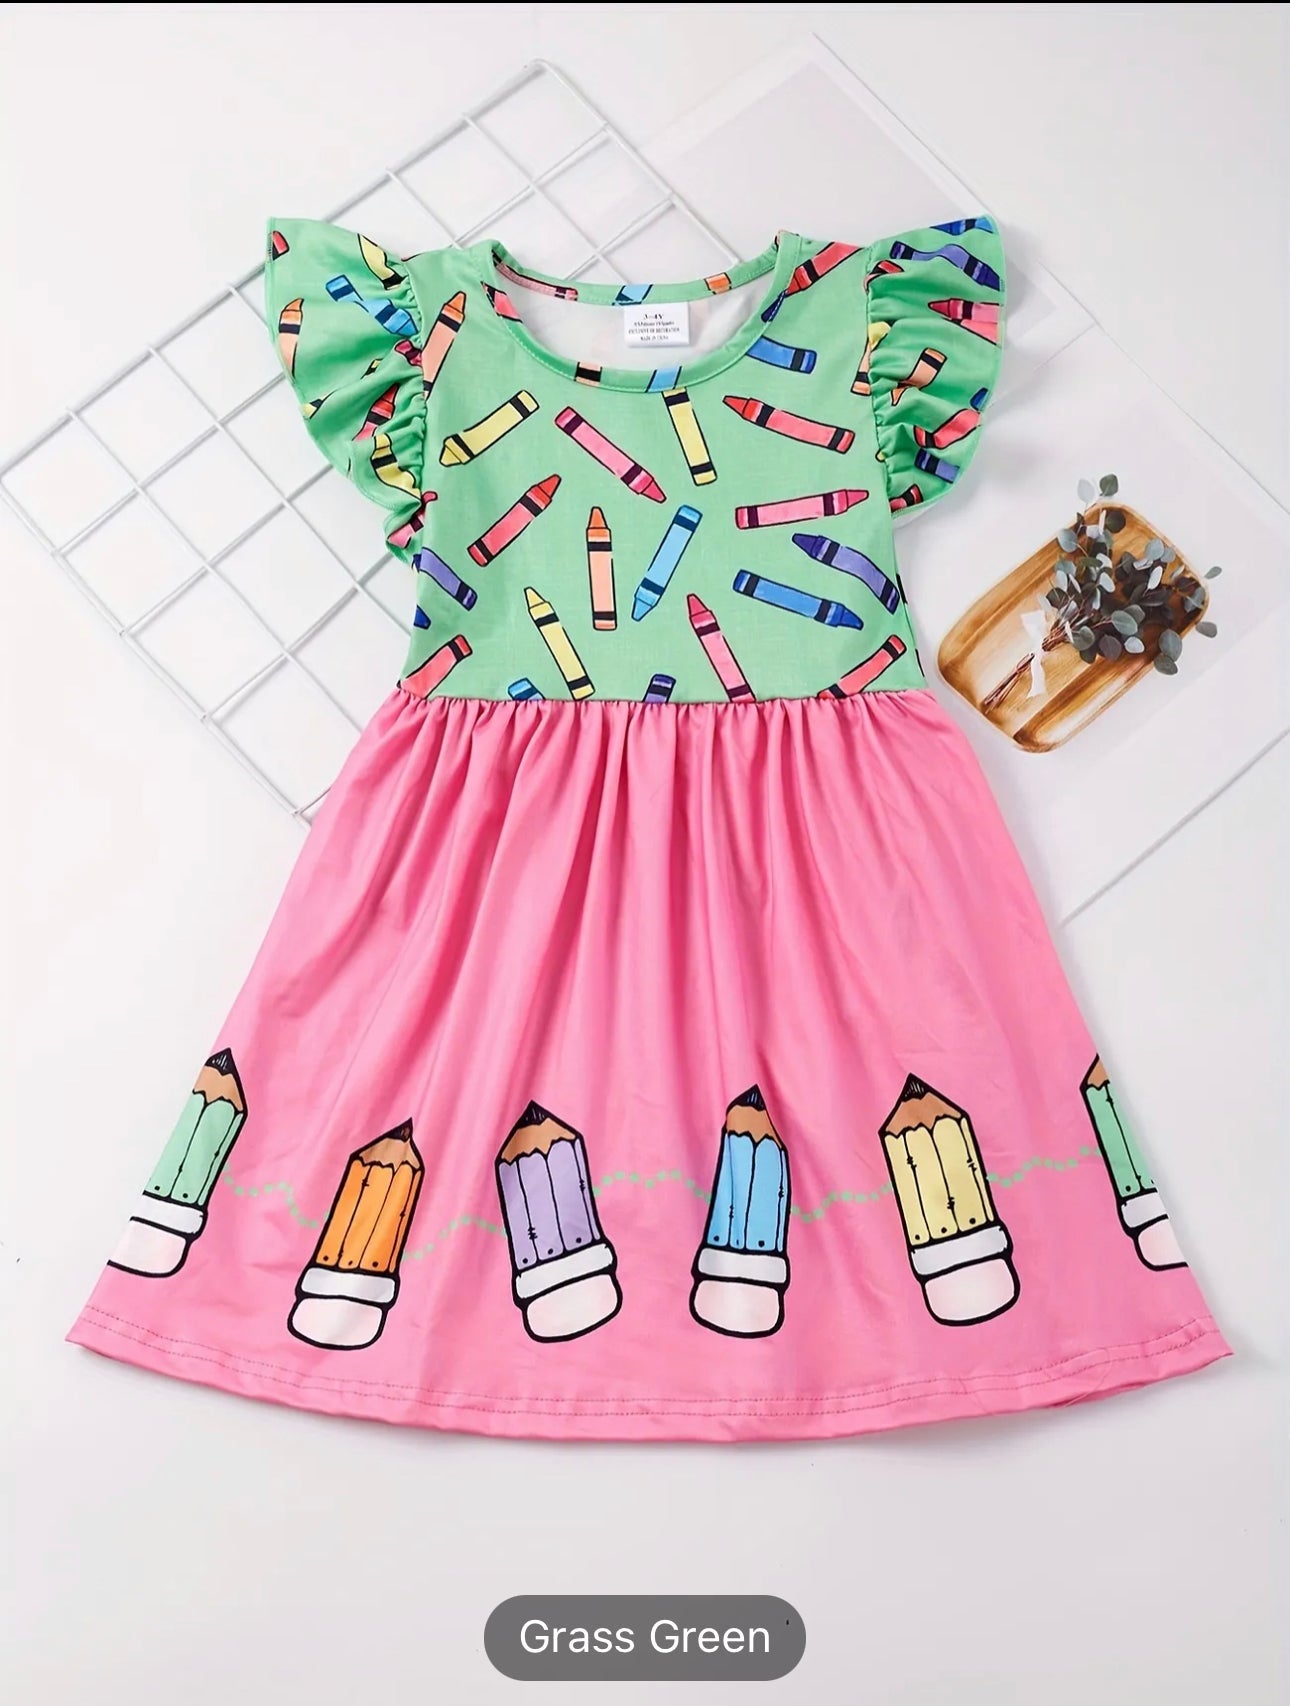 Toddler Girls Ruffle Trim Colorful Crayon Graphic Princess Dress For Back To School Season Party, Cute Kids Summer Clothes